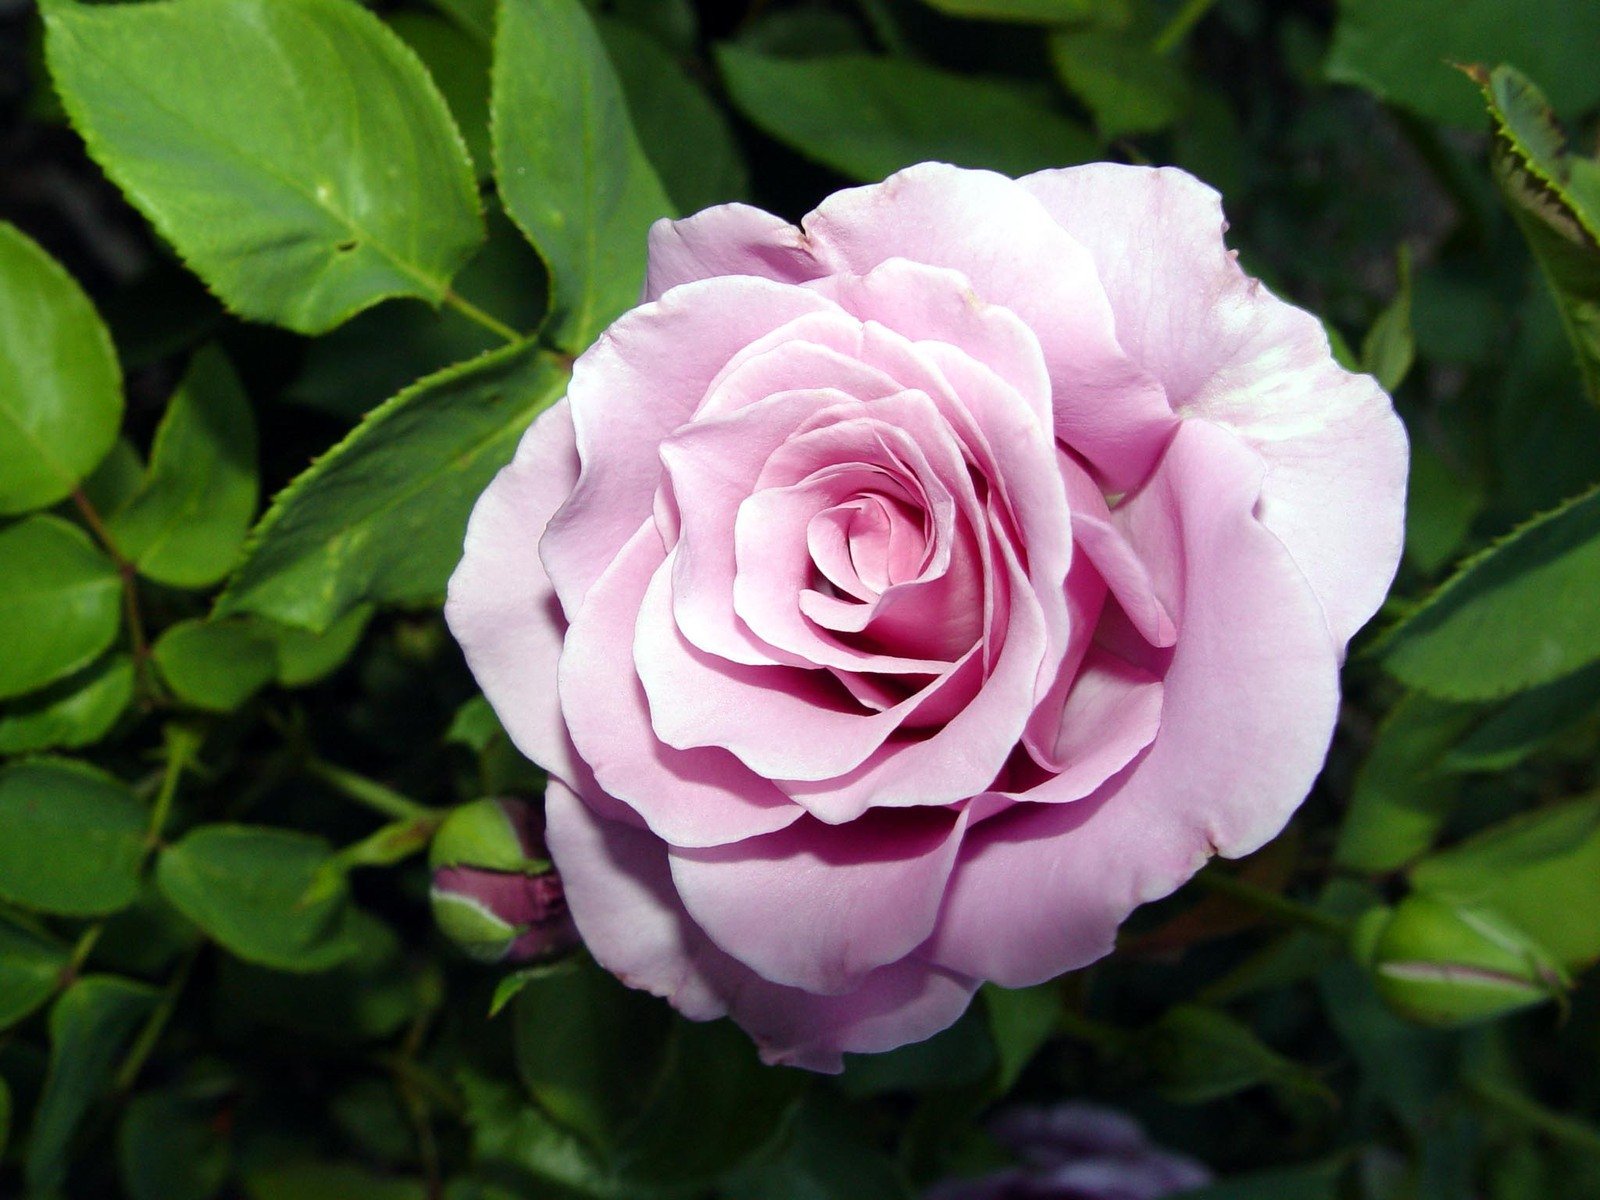 a pink rose with green leaves is open